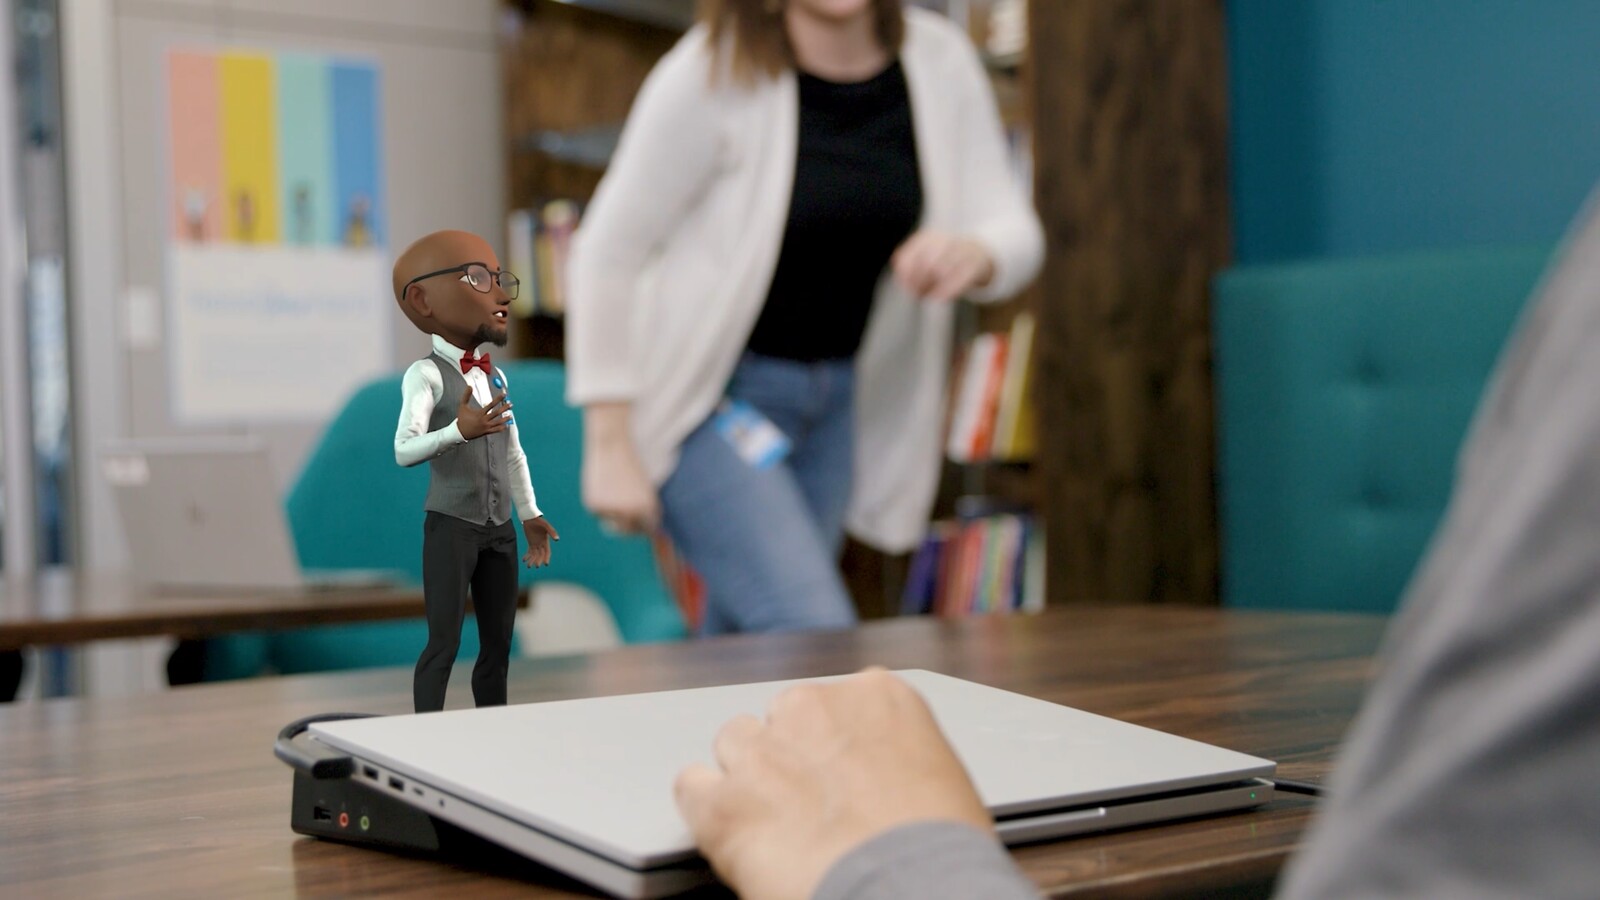 Honey, I shrunk the employee! - Clip from a corporate training video